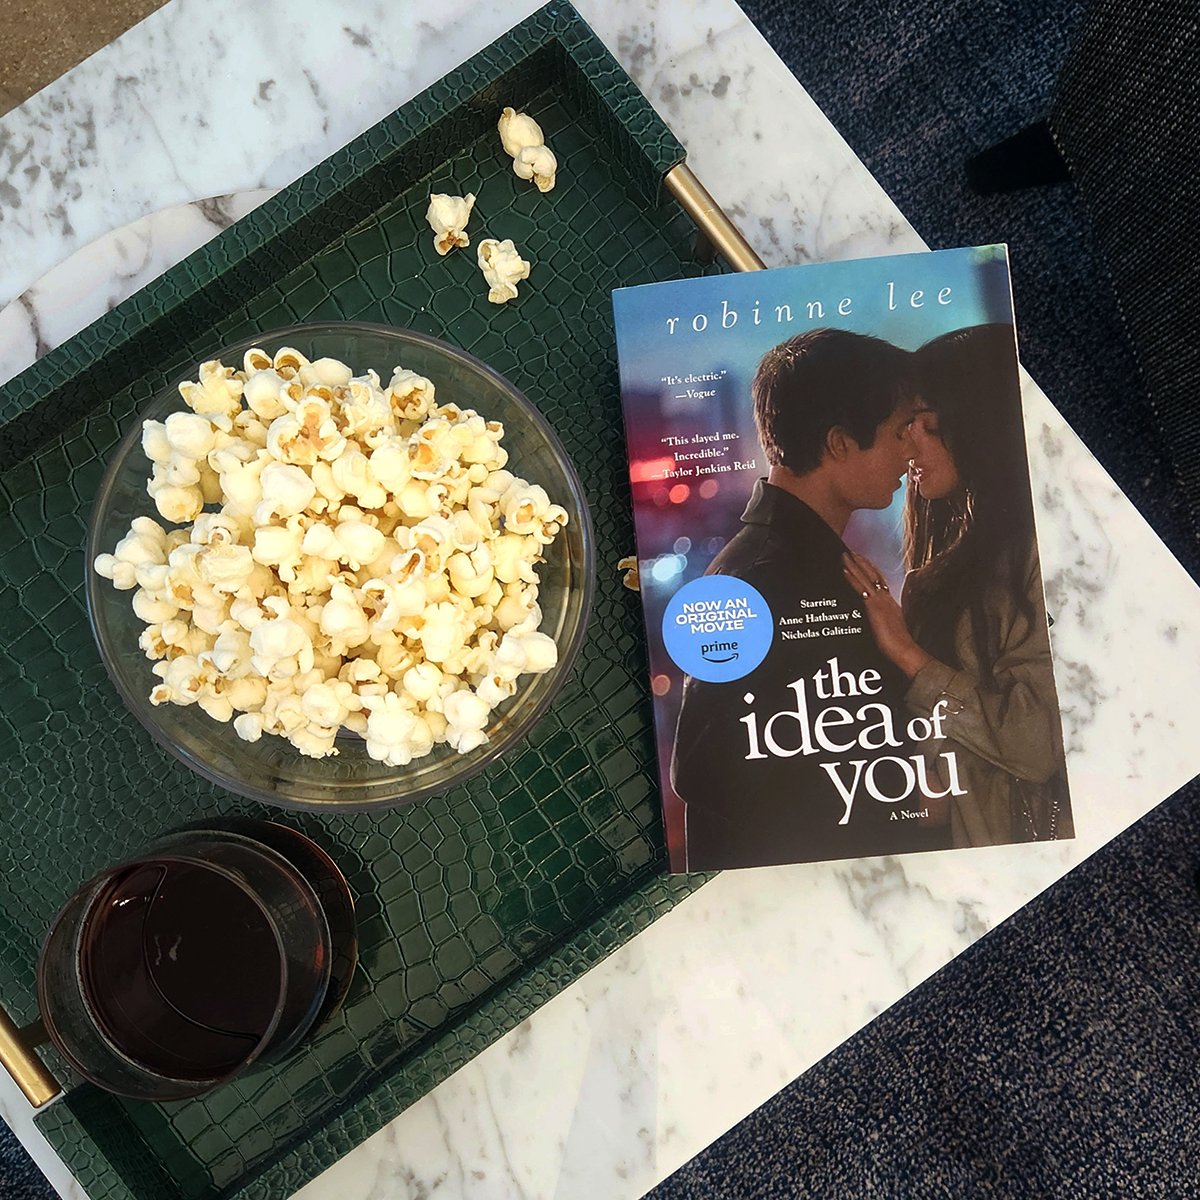 Happy #PubDay to this stunning edition of THE IDEA OF YOU!

Robinne Lee's iconic romance, filled with rollercoaster feelings and steamy encounters, will leave you star stuck. Be sure to watch the movie adaption—streaming on Amazon prime on 5/2. bit.ly/44kG54w